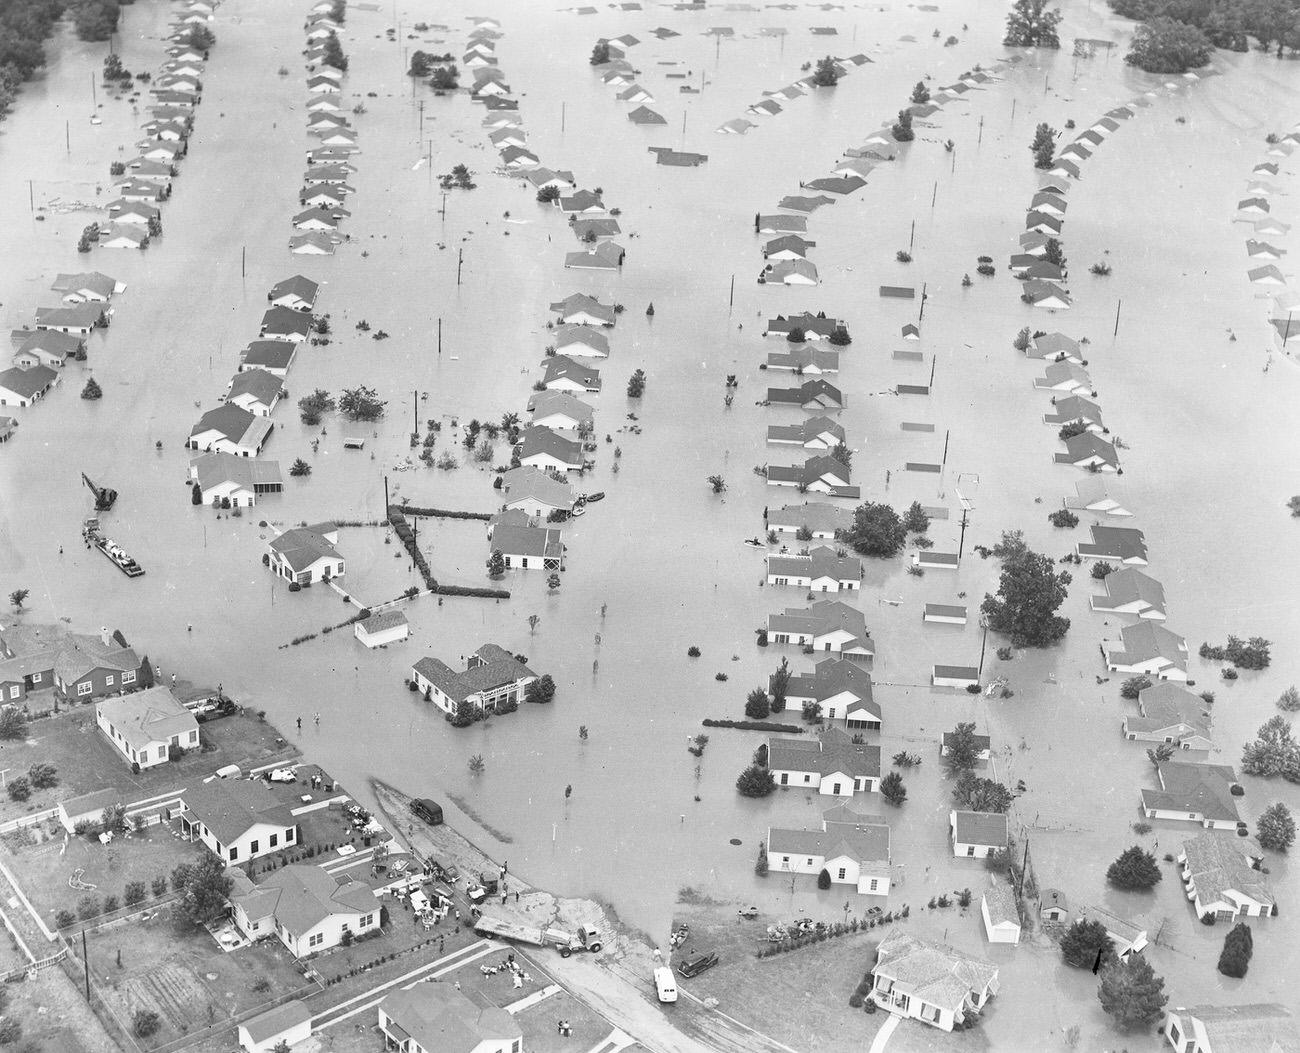 Fort Worth, Texas, flood of 1949, showing a neighborhood of homes under water, 1949